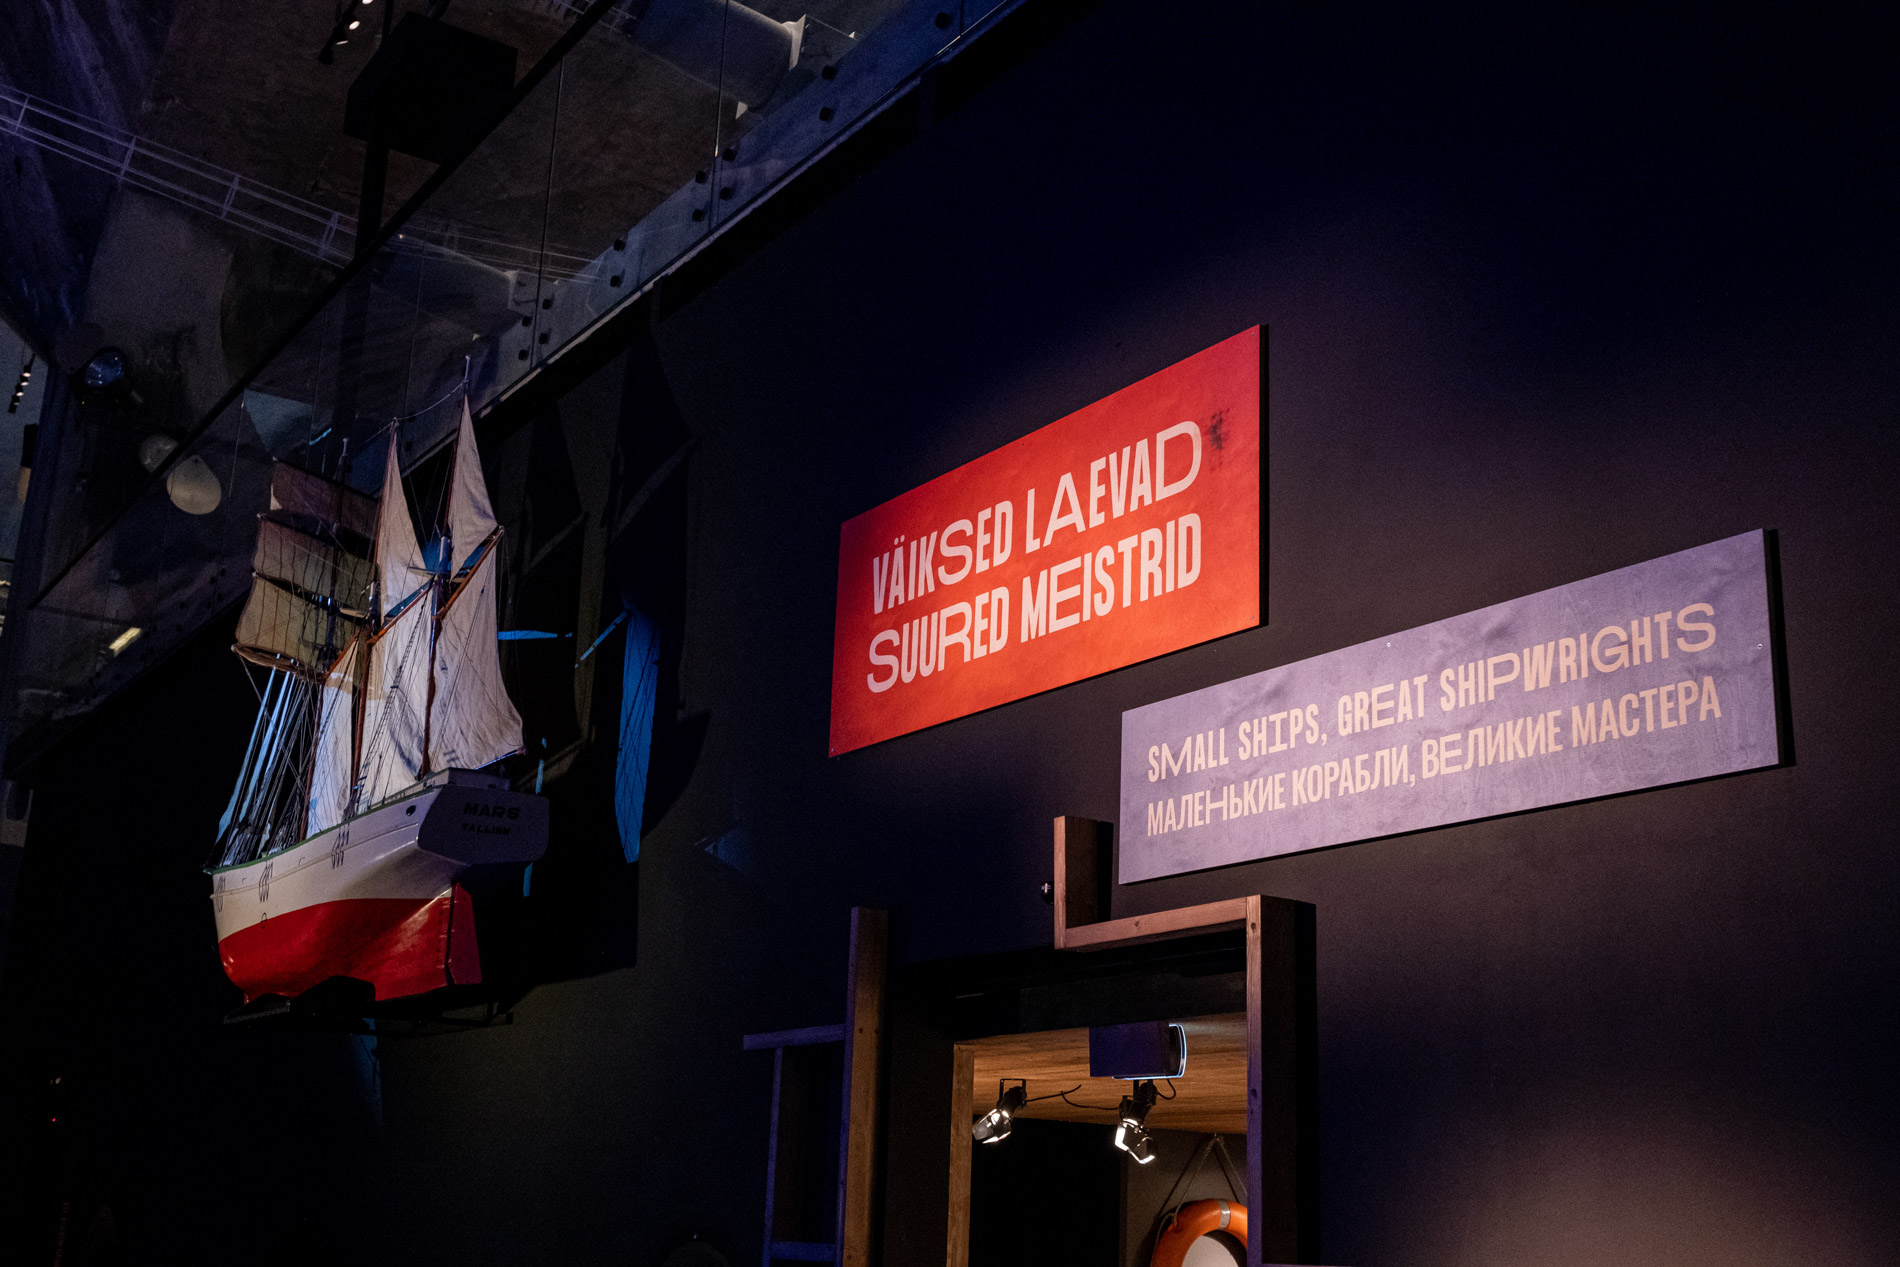 An exhibition that will showcase 26 masterful ship models from talented Estonian model makers.